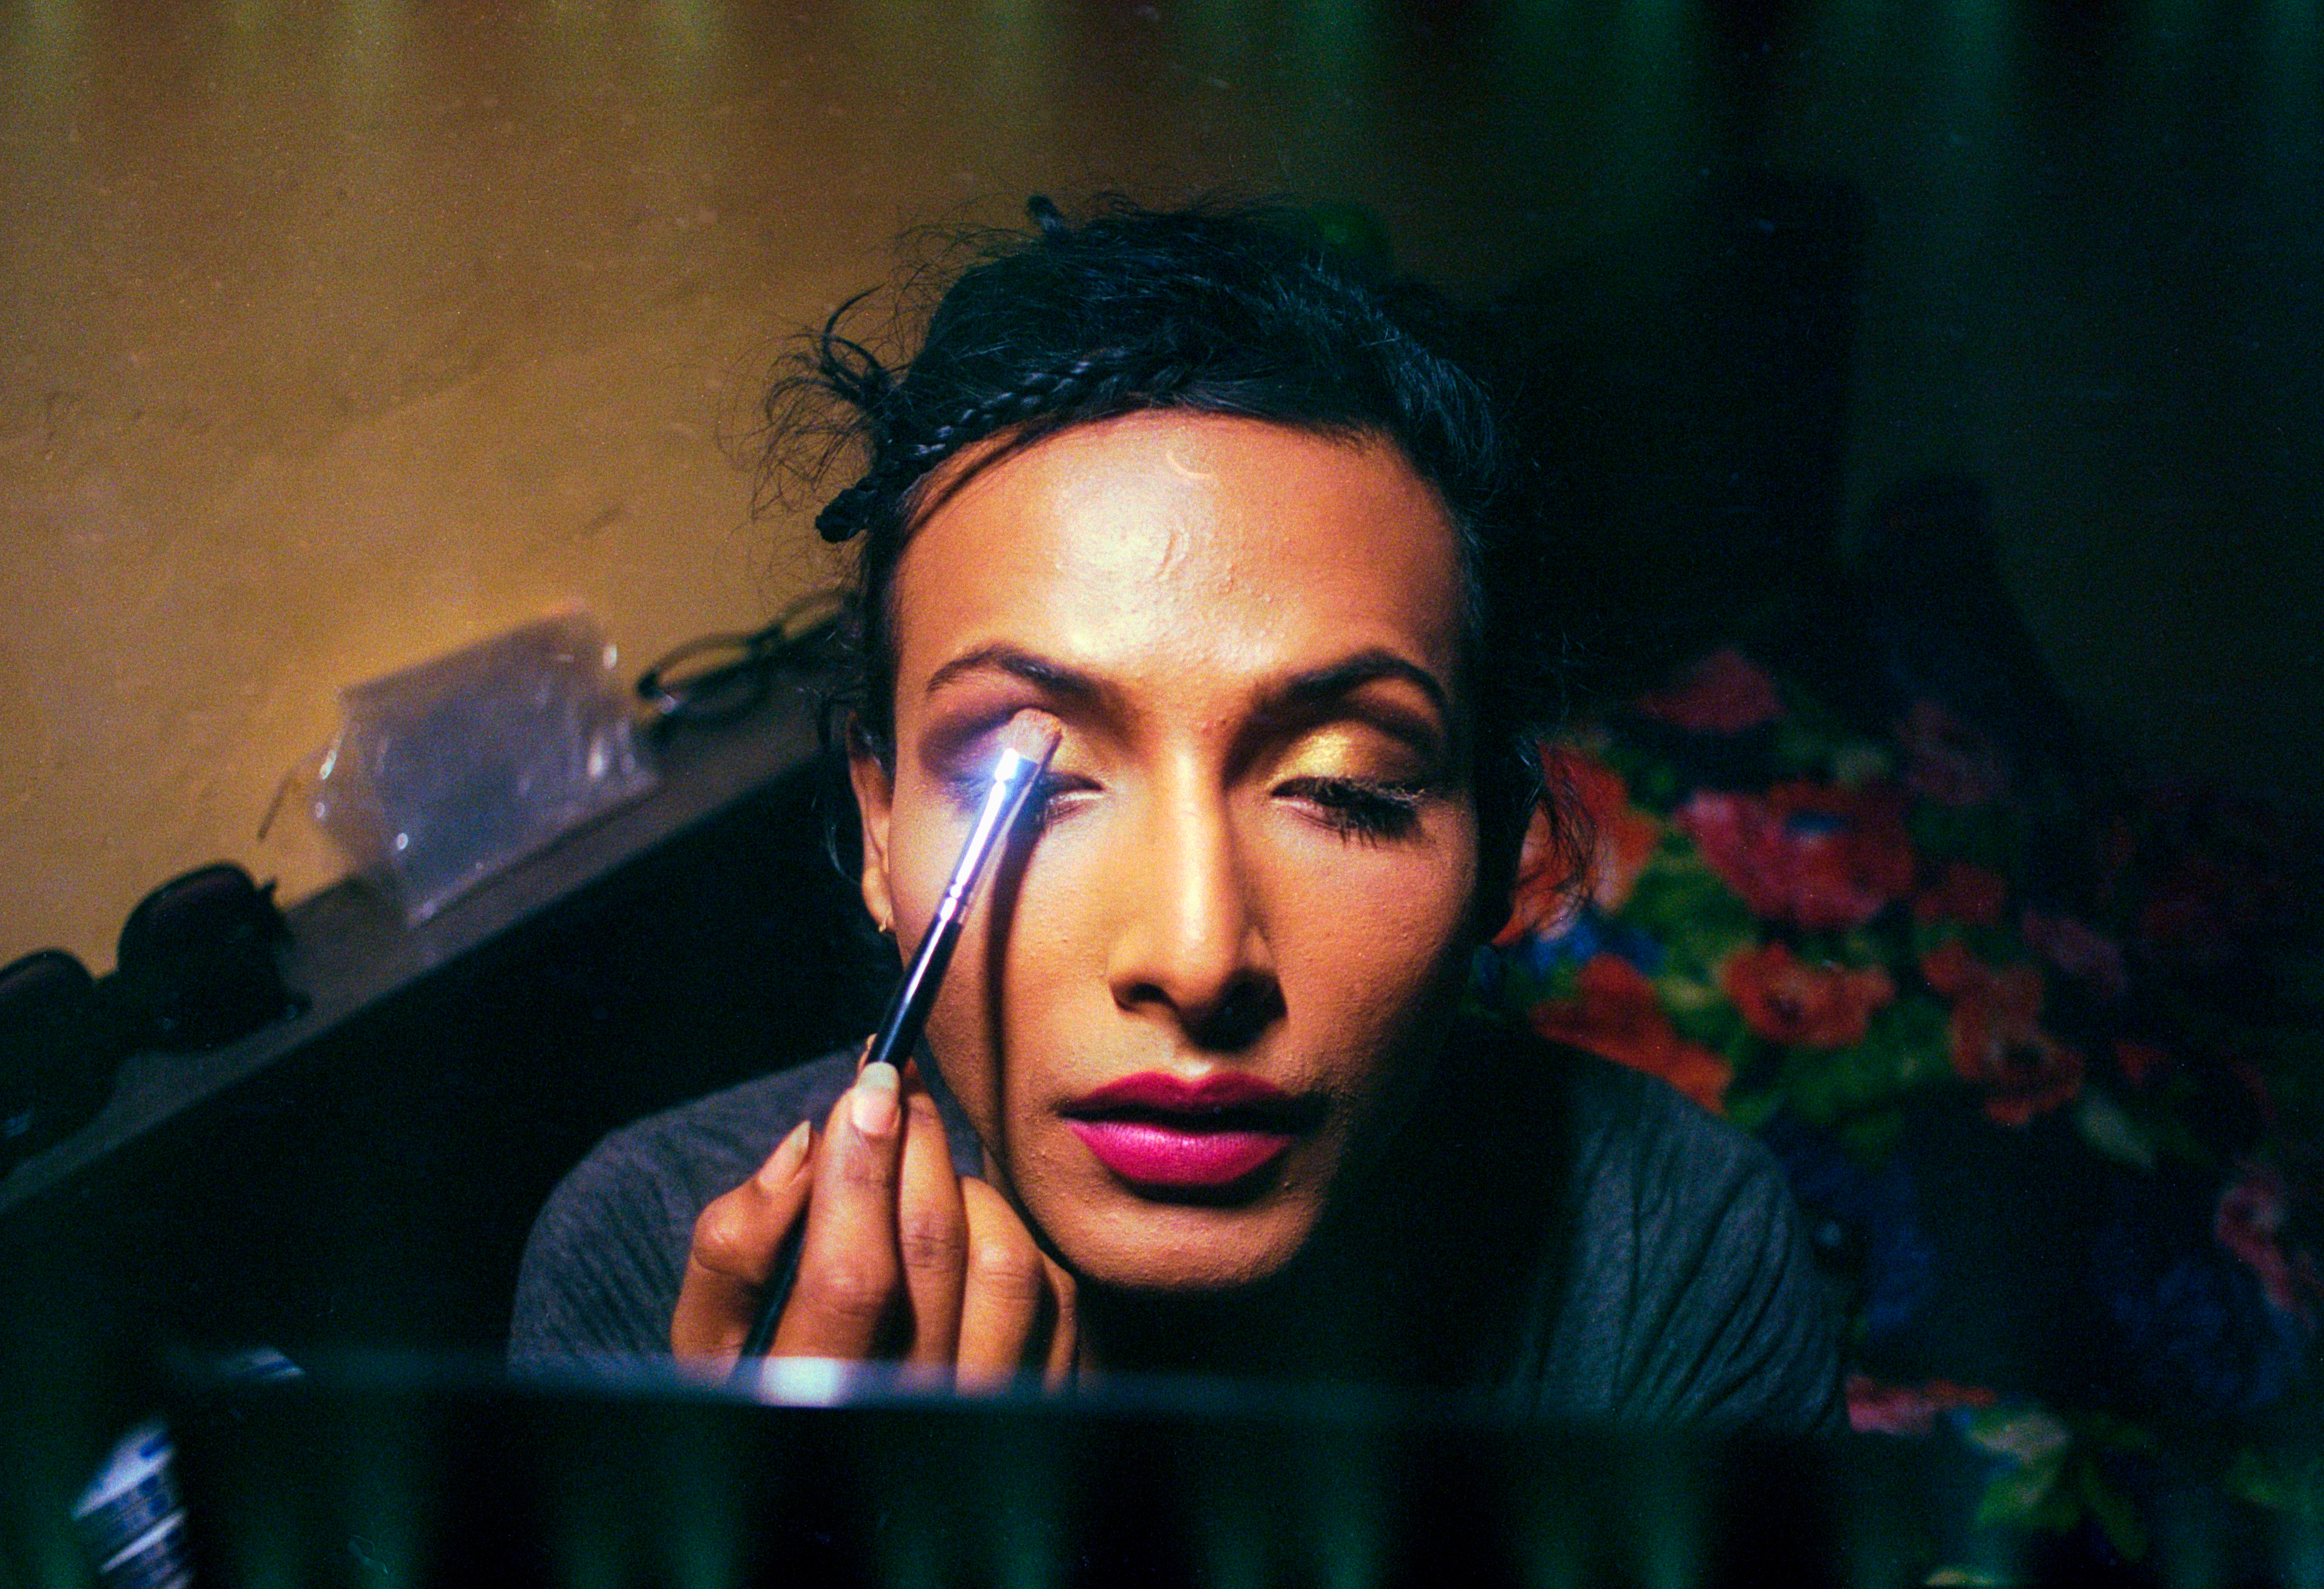 Photographer captures intimate moments among a group of trans women in Peru